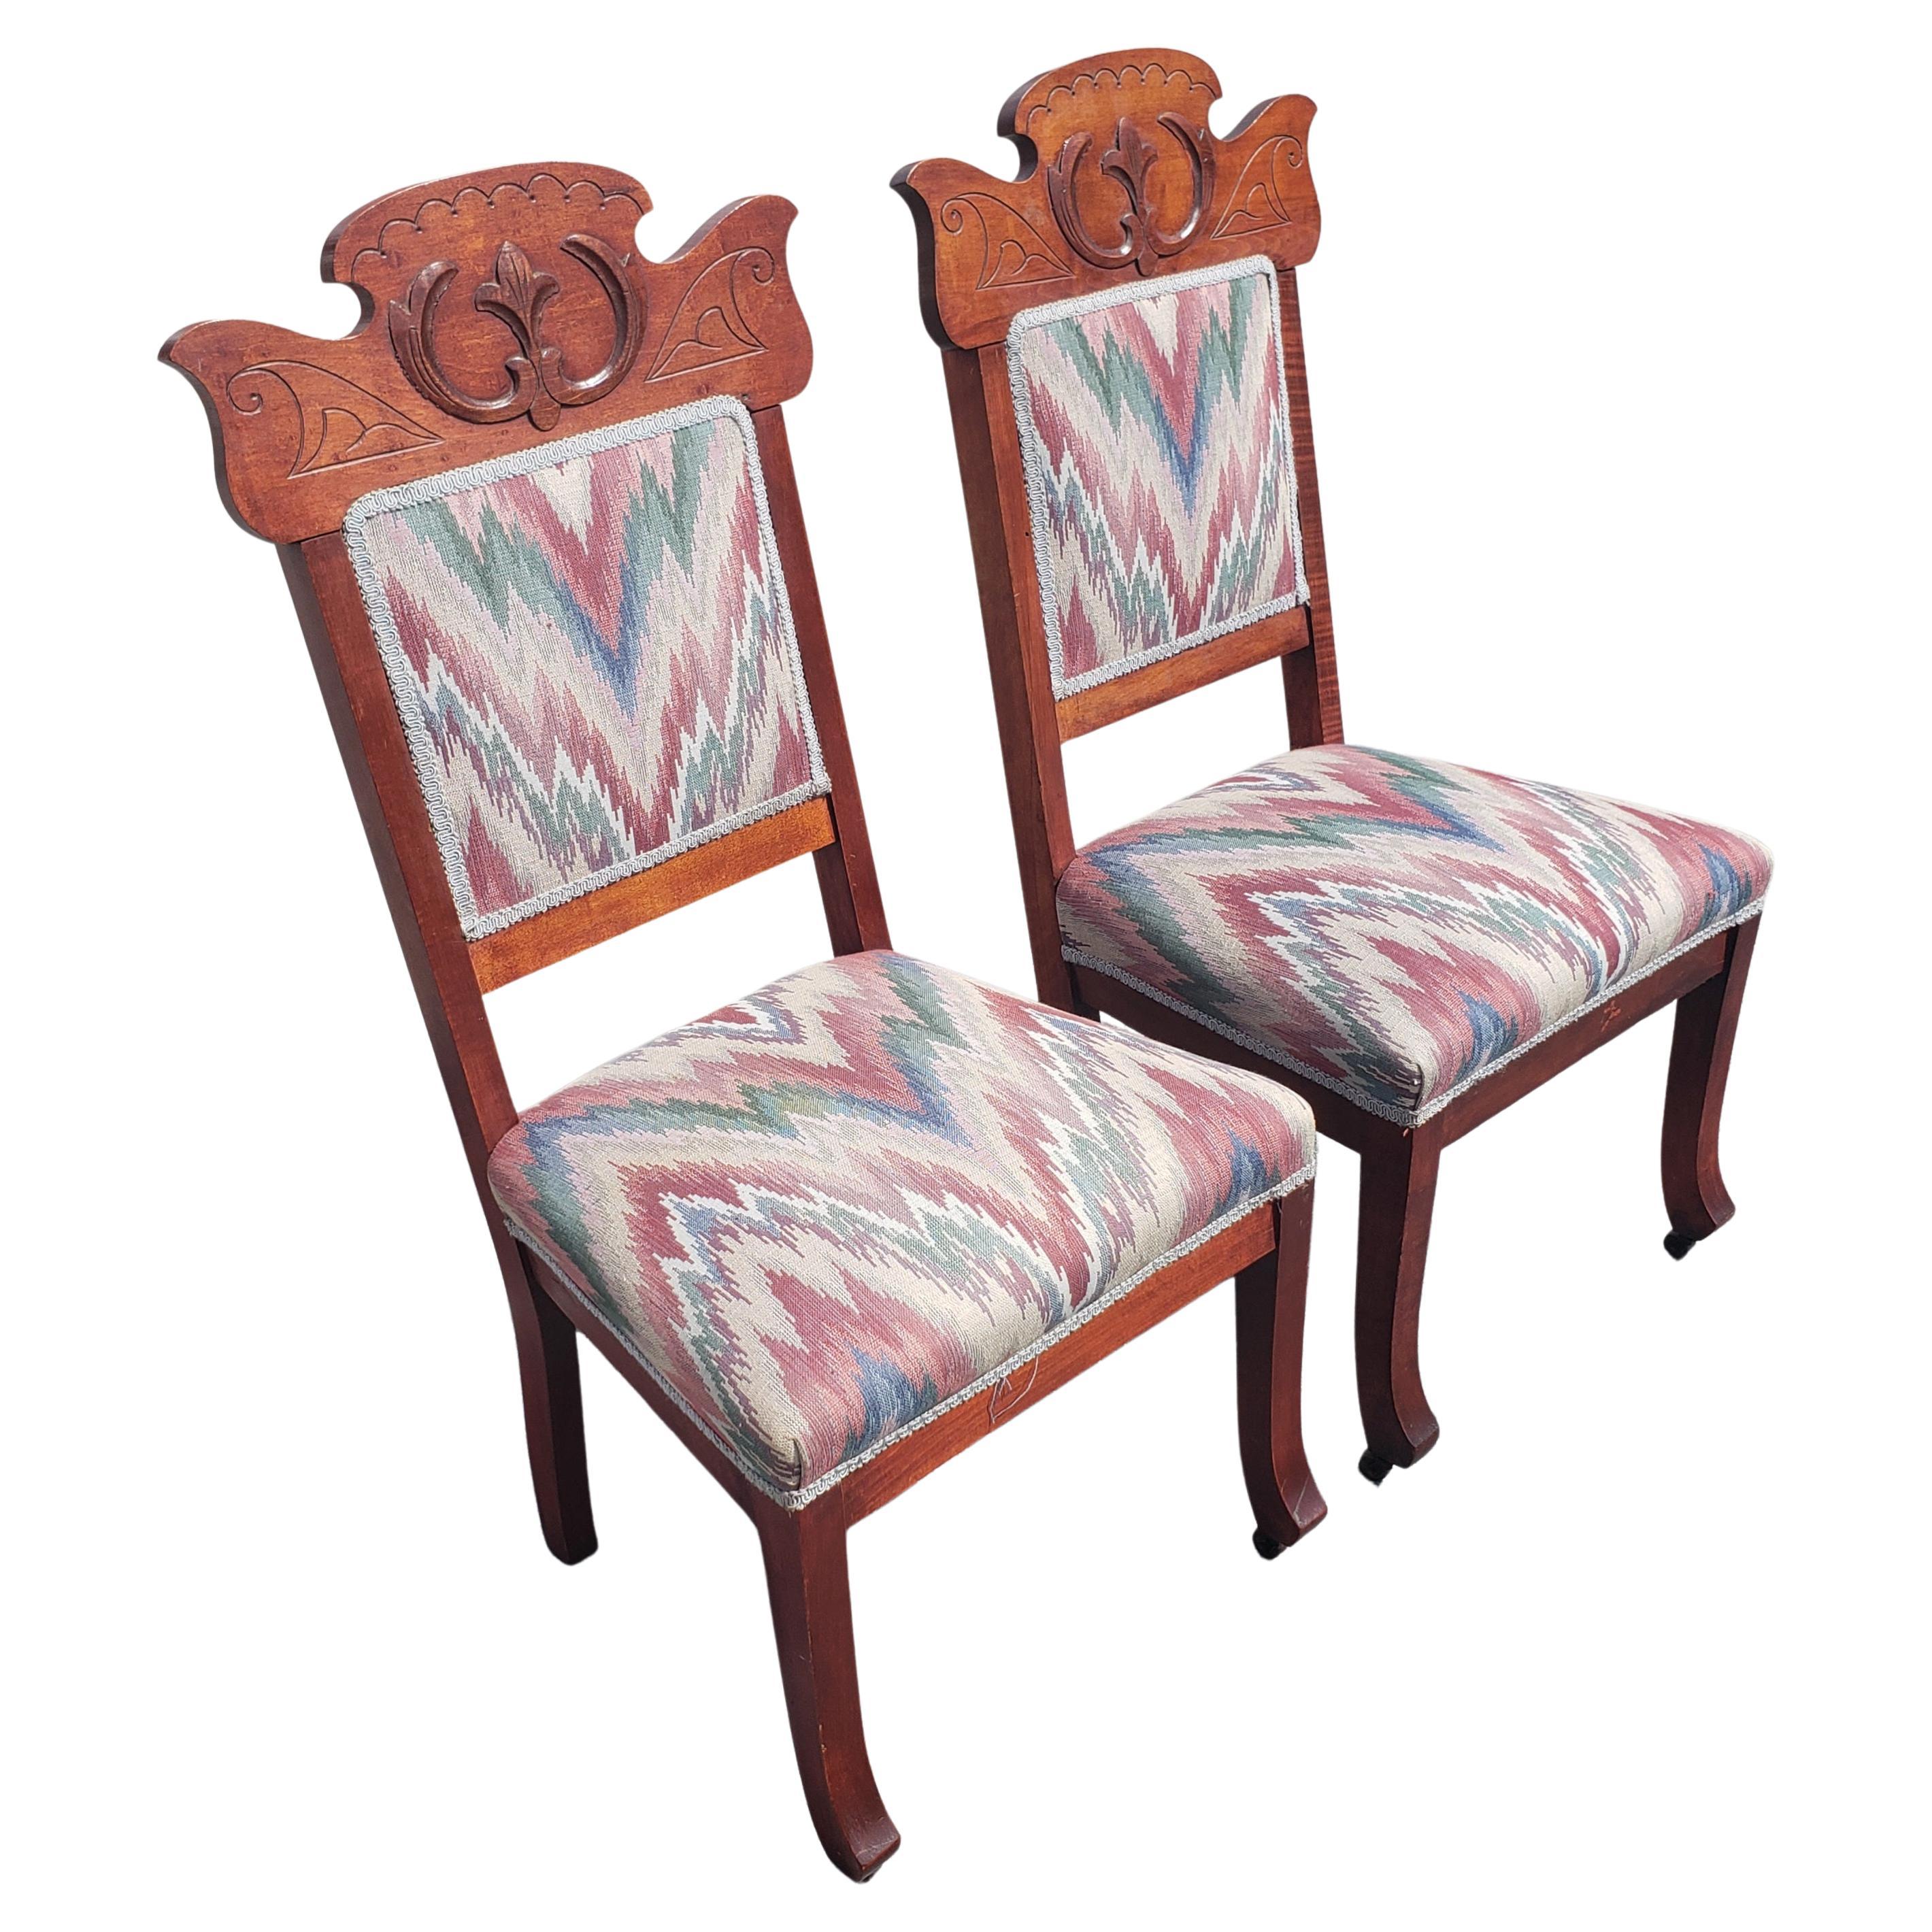 Edwardian Eastlake Carved Mahogany Upholstered Chairs, circa 1920s, a Pair  For Sale 1